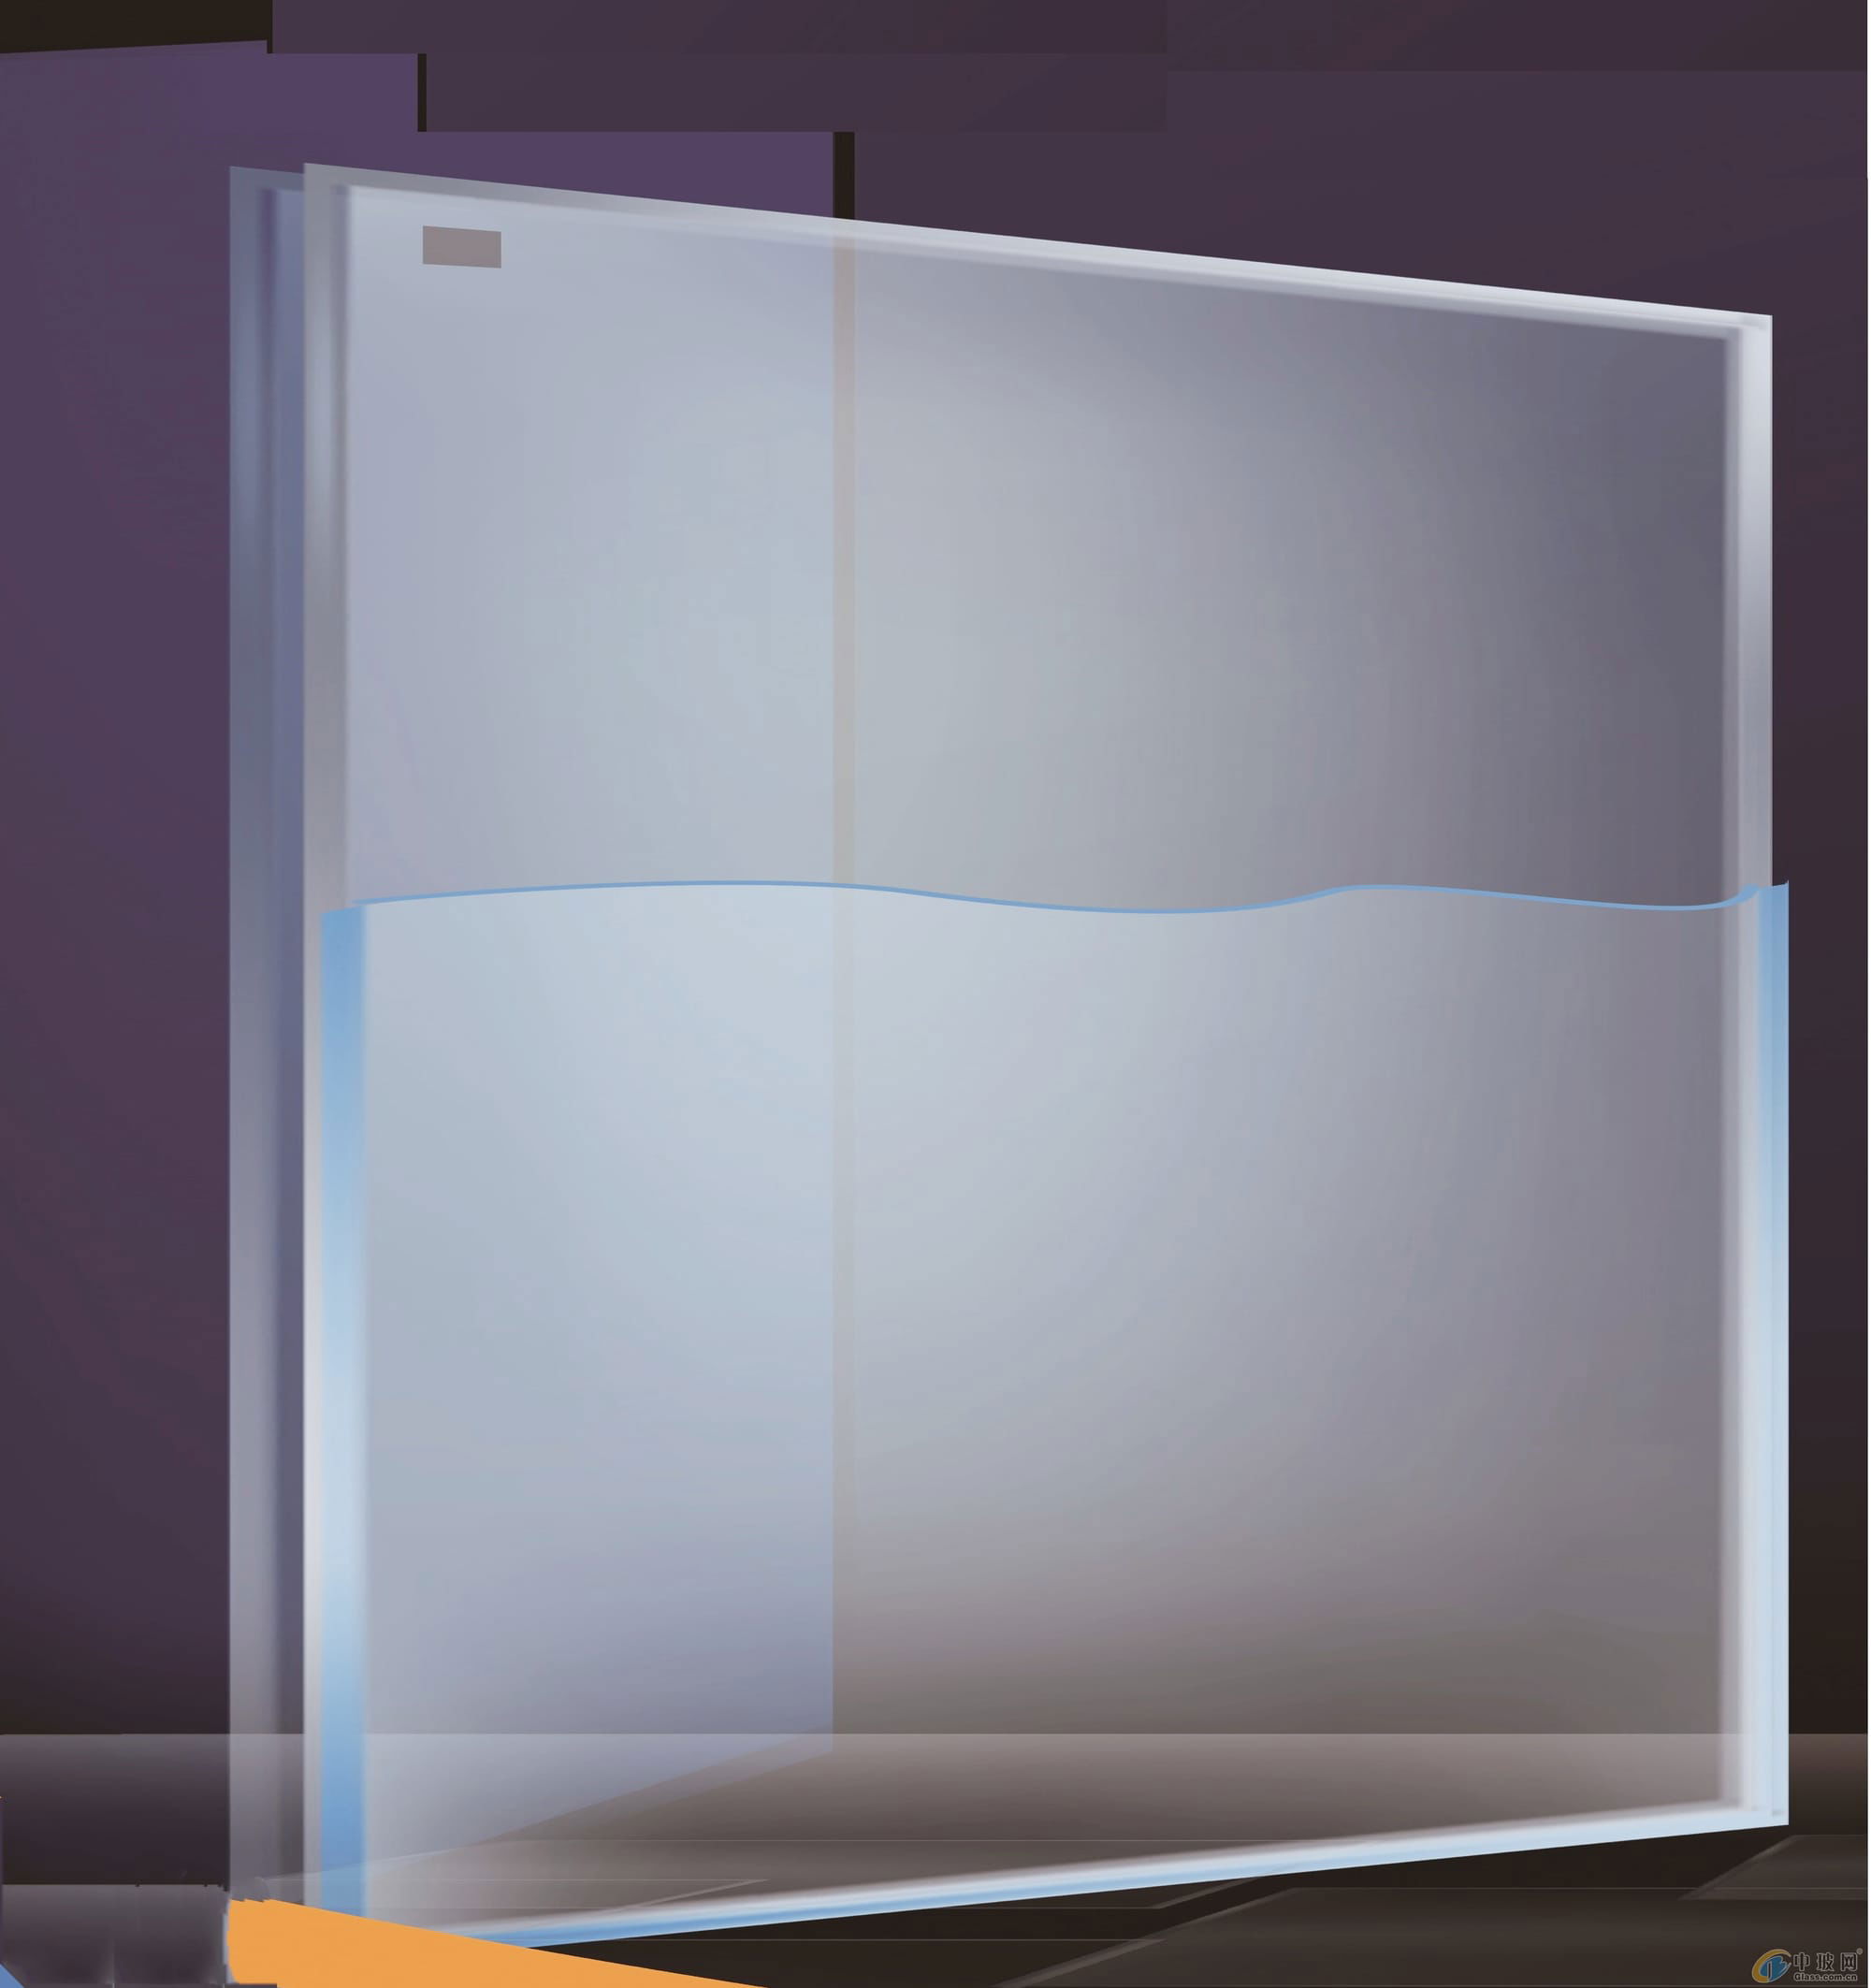 Detailed explanation of the difference between vacuum glass and insulating glass.